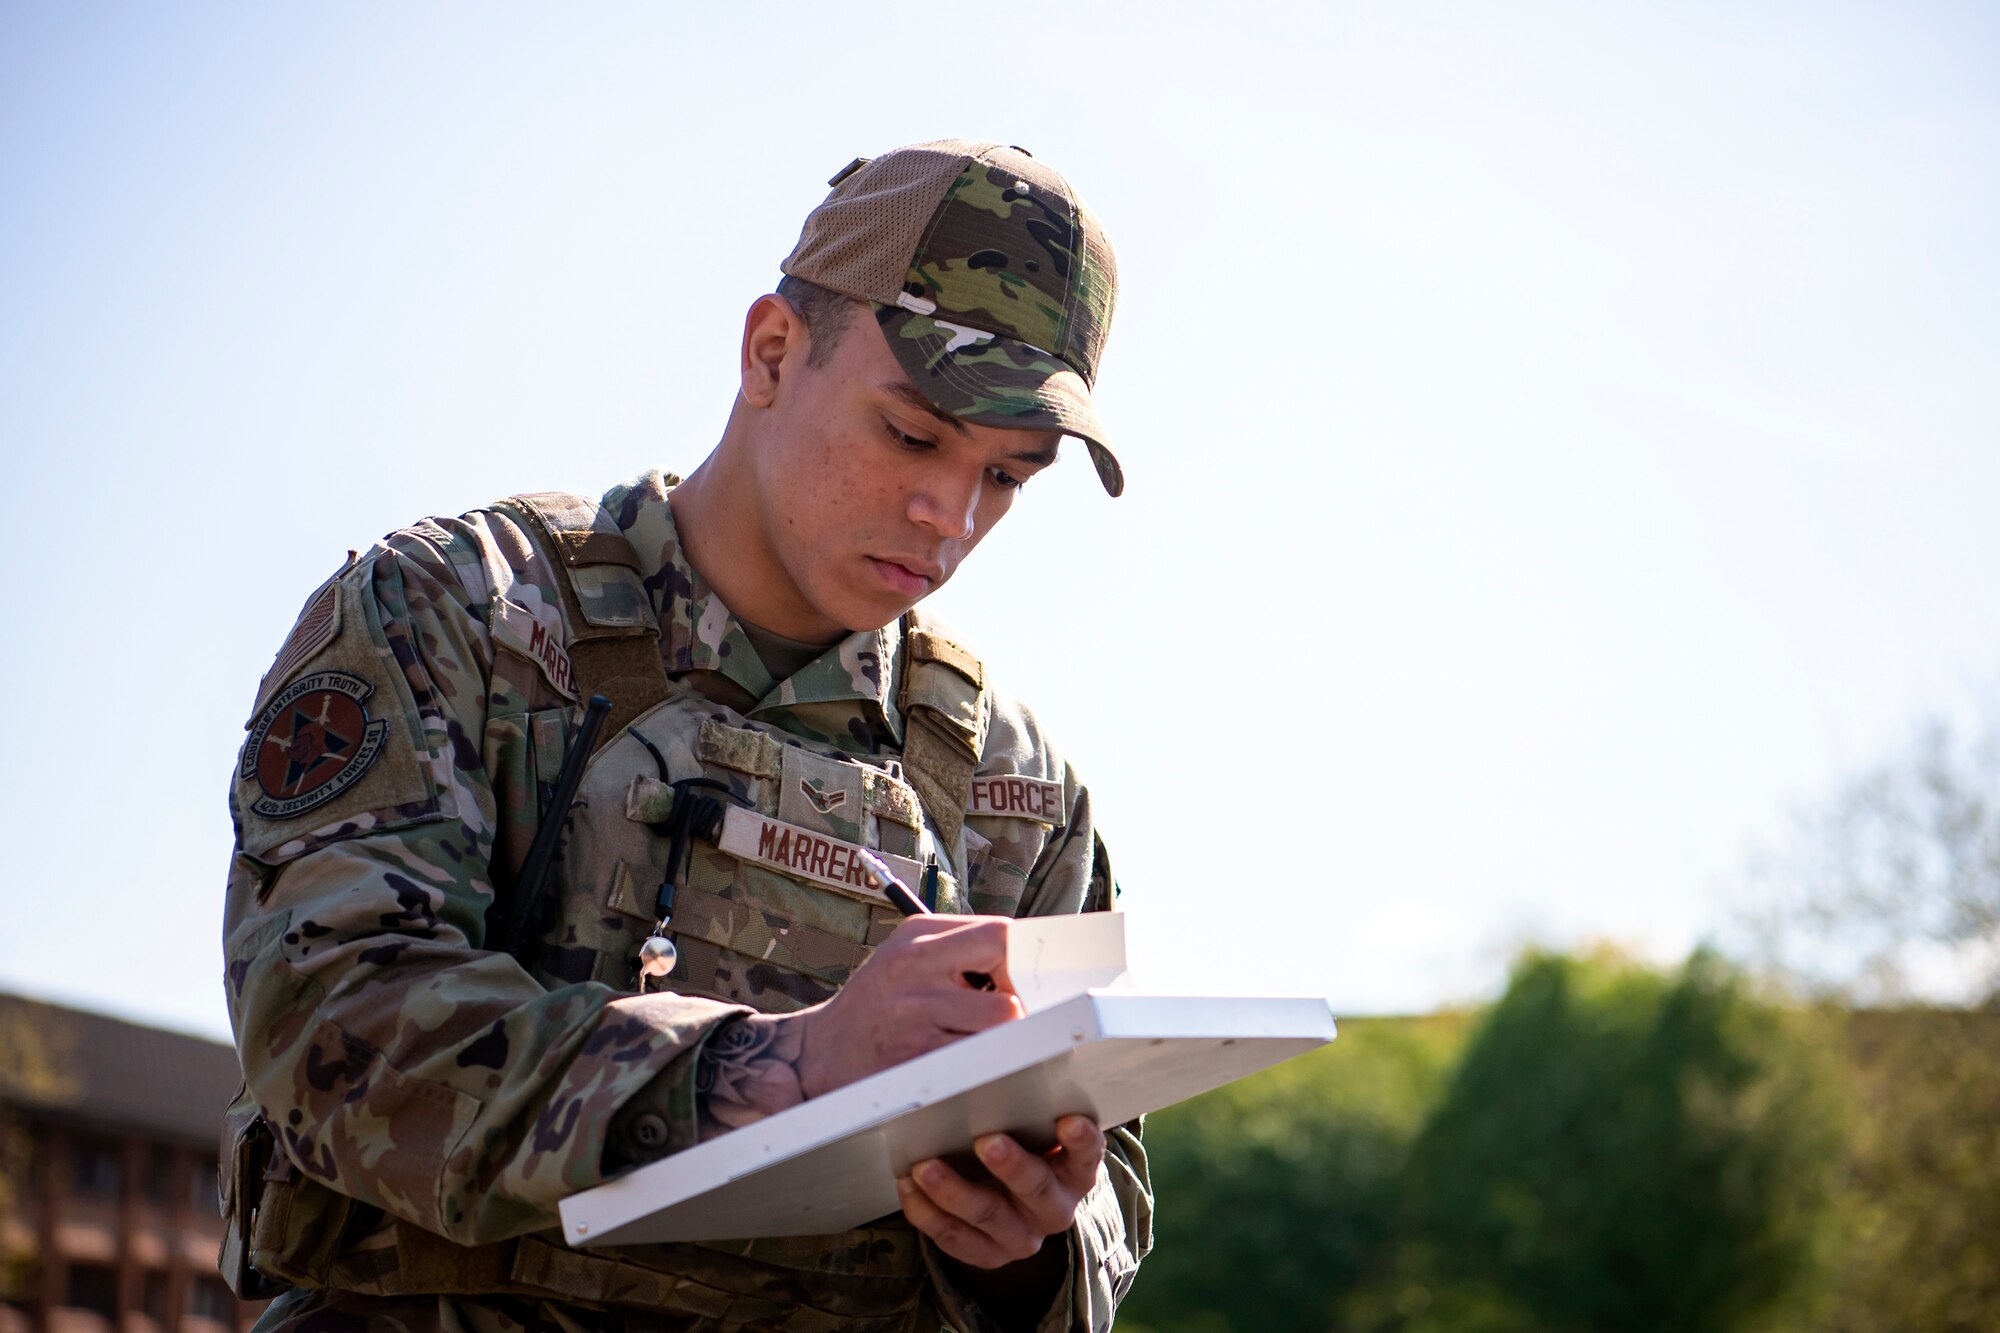 U.S. Air Force Airman 1st Class Trystan Marrero, left, 423d Security Forces Squadron patrolman, writes notes during a field training exercise at RAF Alconbury, England April 26, 2022. The exercise was designed to evaluate the strengths and weaknesses of 423d SFS members' response to various scenarios including domestic disturbances, drunk driving and other base security incidents. (U.S. Air Force photo by Staff Sgt. Eugene Oliver)